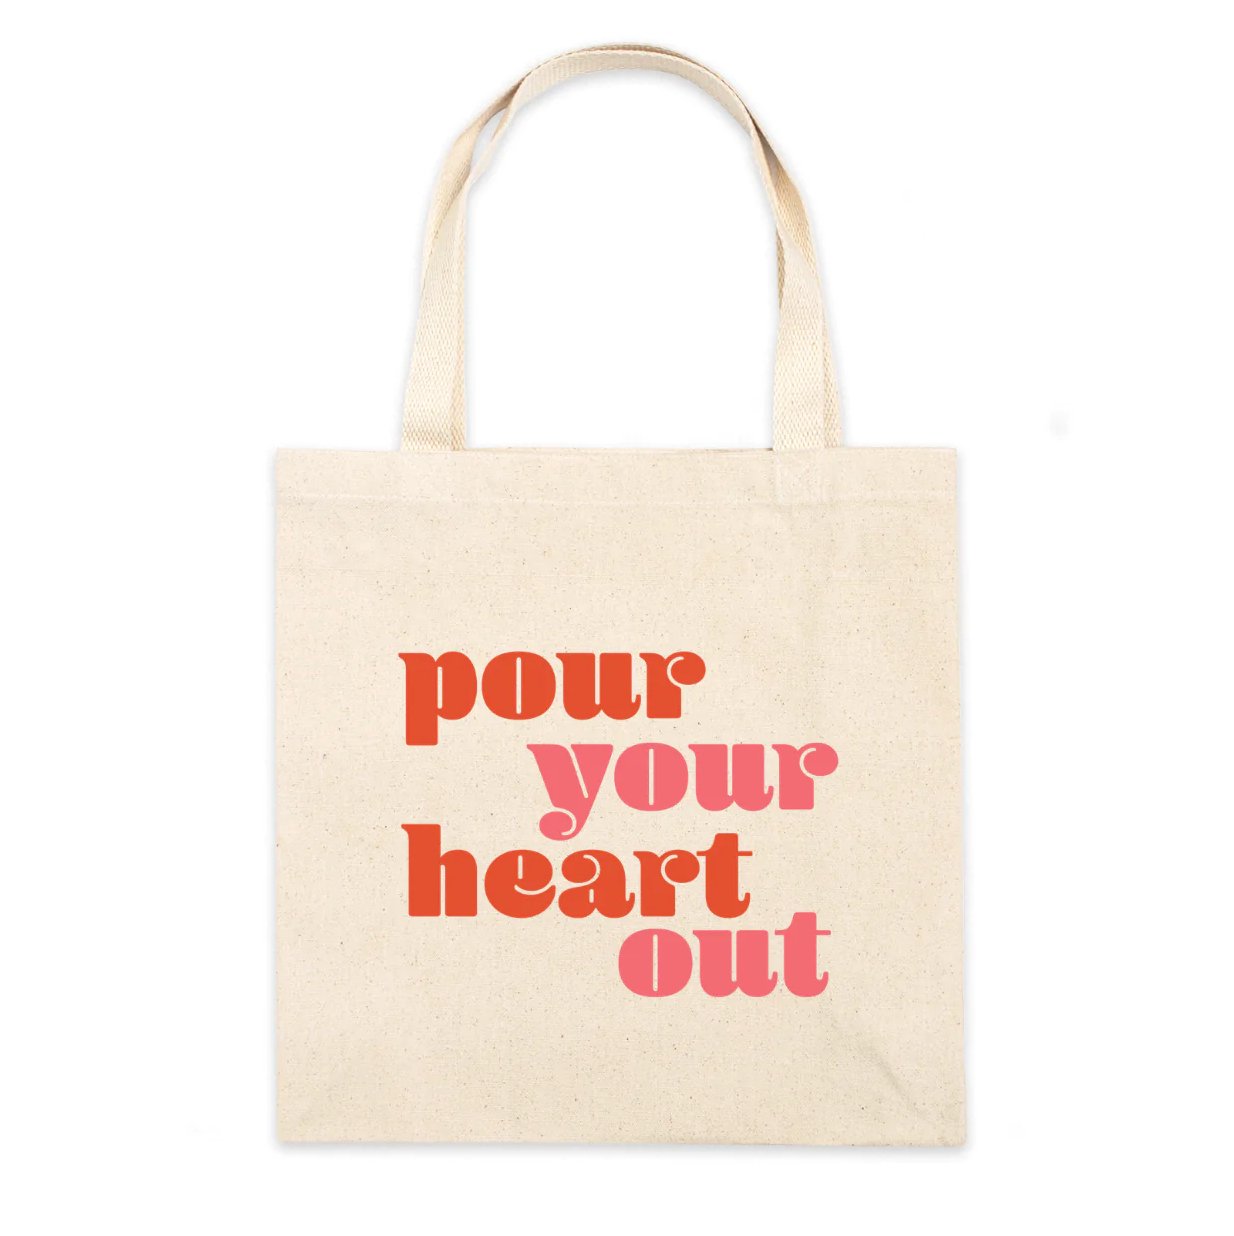 Pour Your Heart Out Tote Bag Tote Bag by Posse Paper Goods